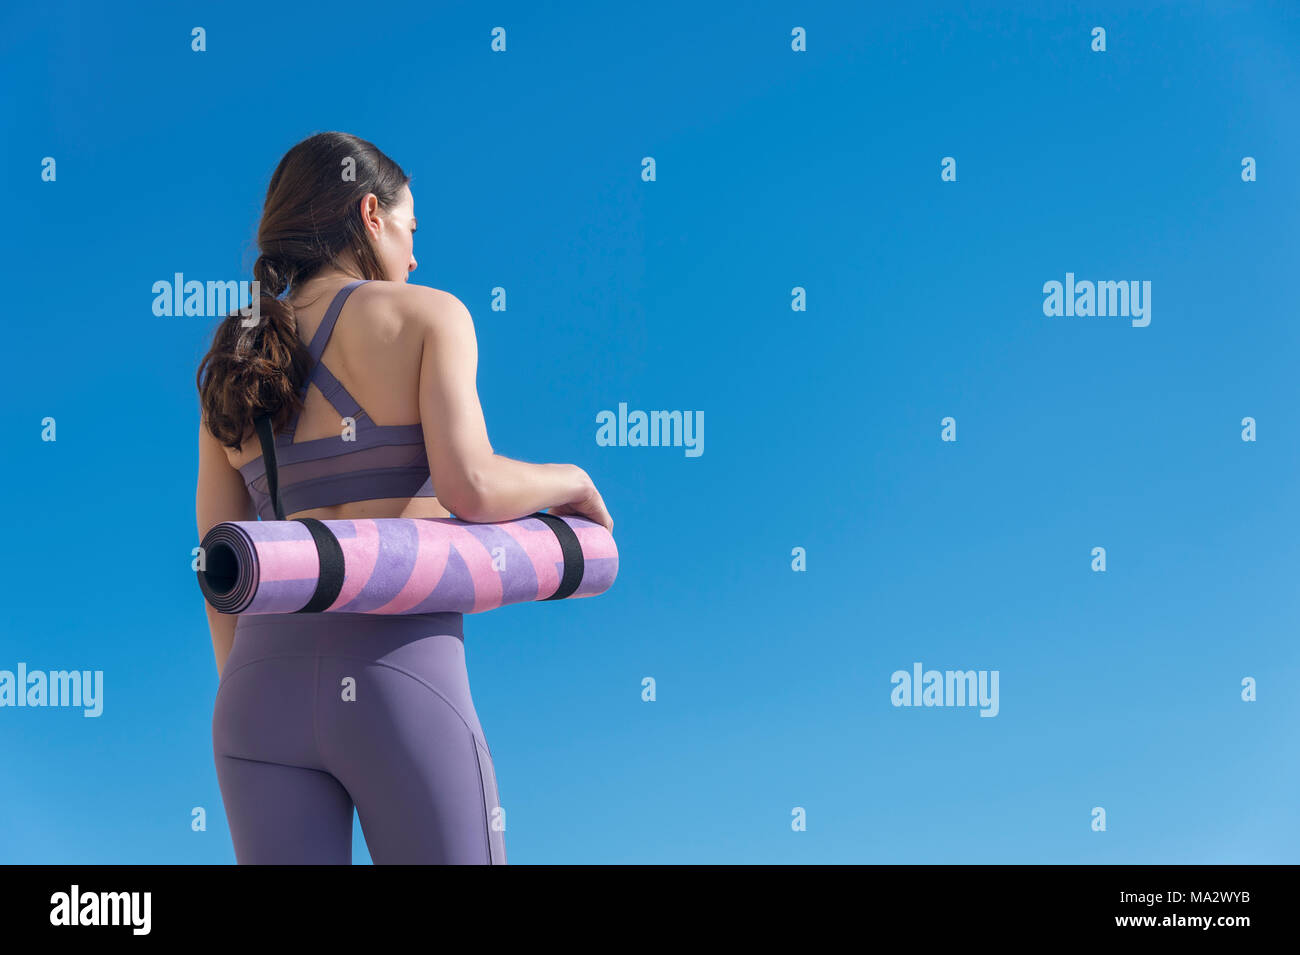 back view of a woman carrying a rolled up yoga mat with blue sky background Stock Photo